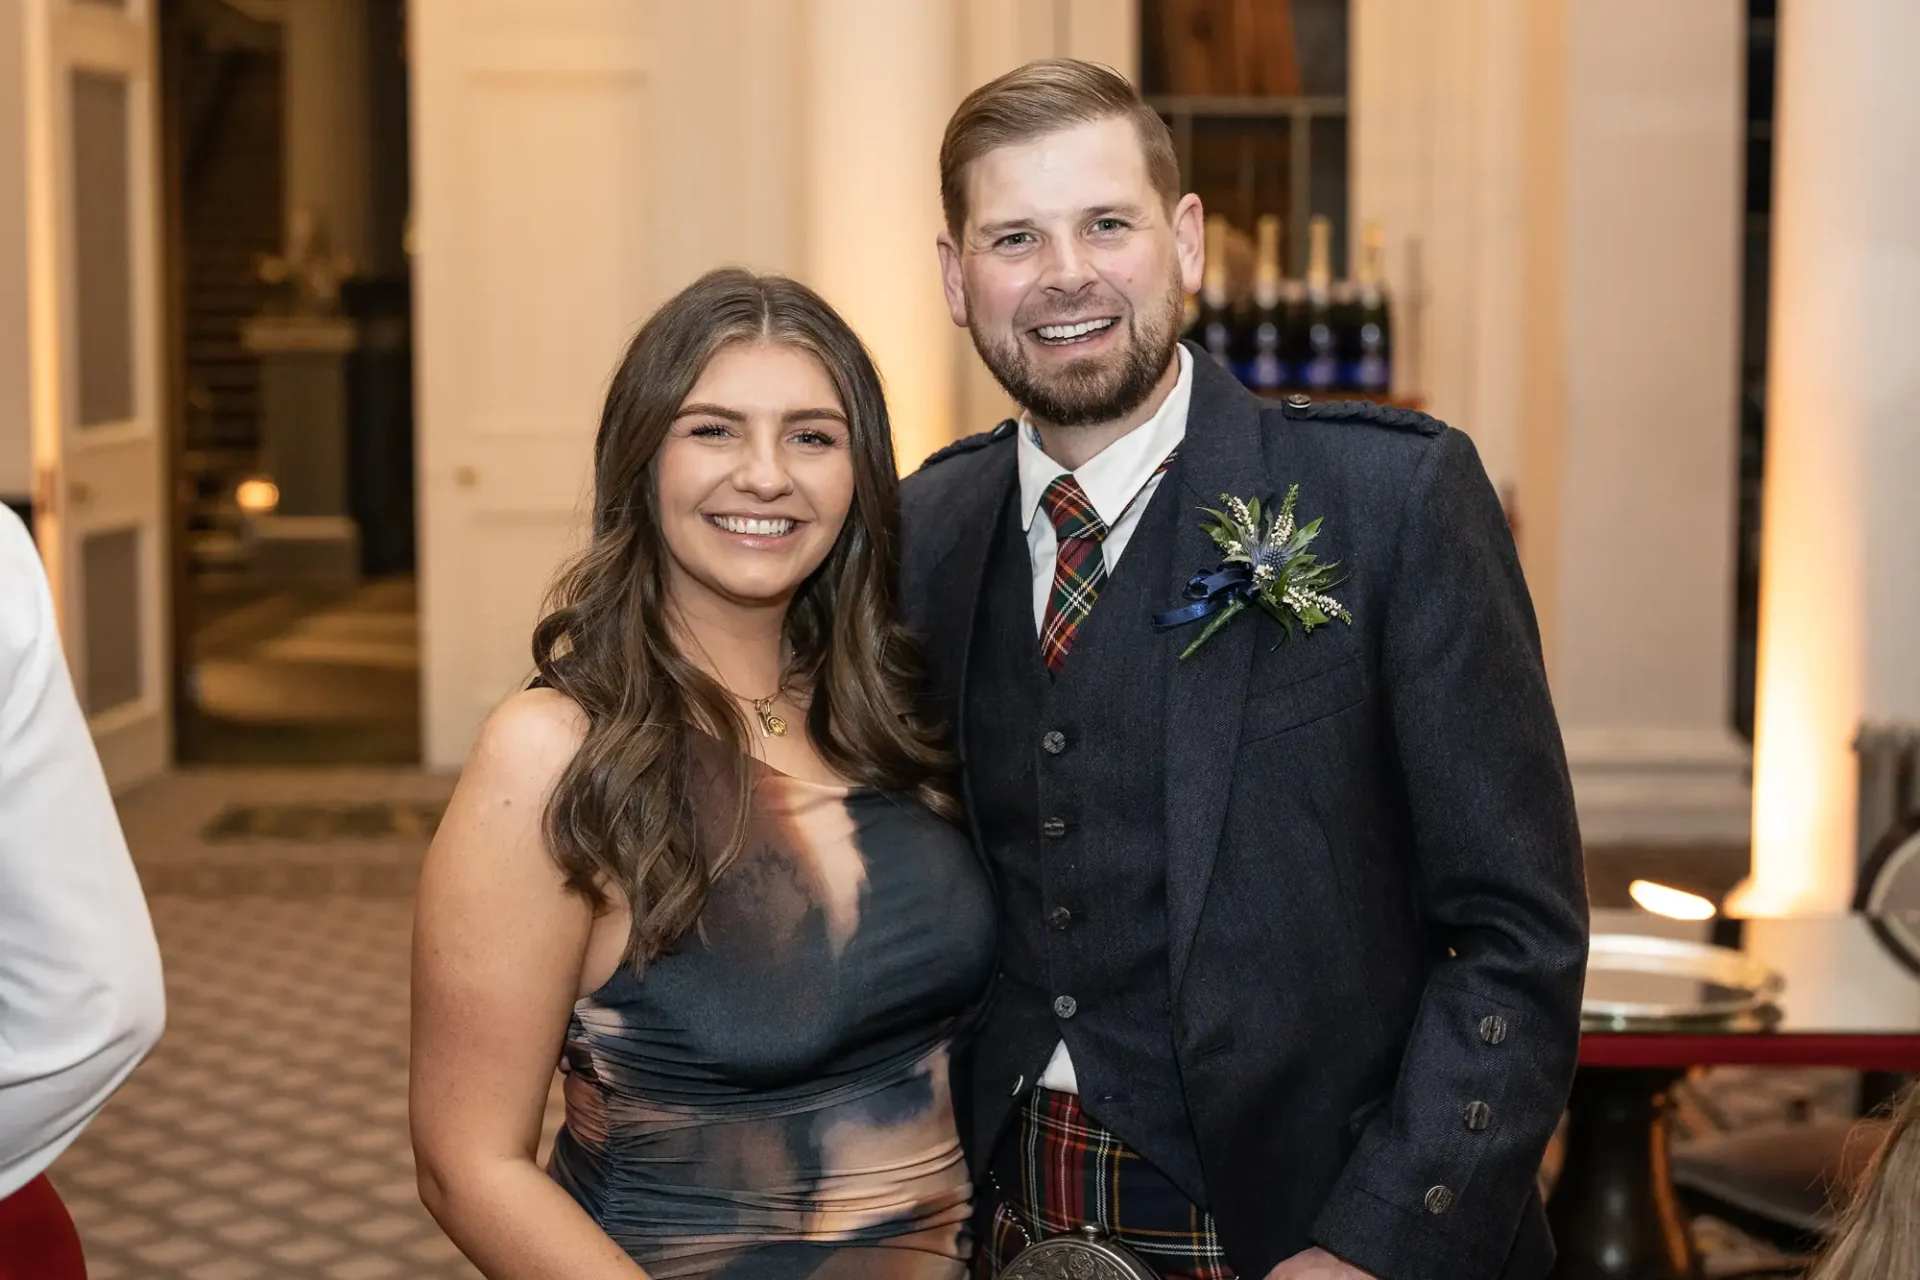 A man in a tartan kilt and jacket with a woman in a gray dress, both smiling, standing together at an indoor event.